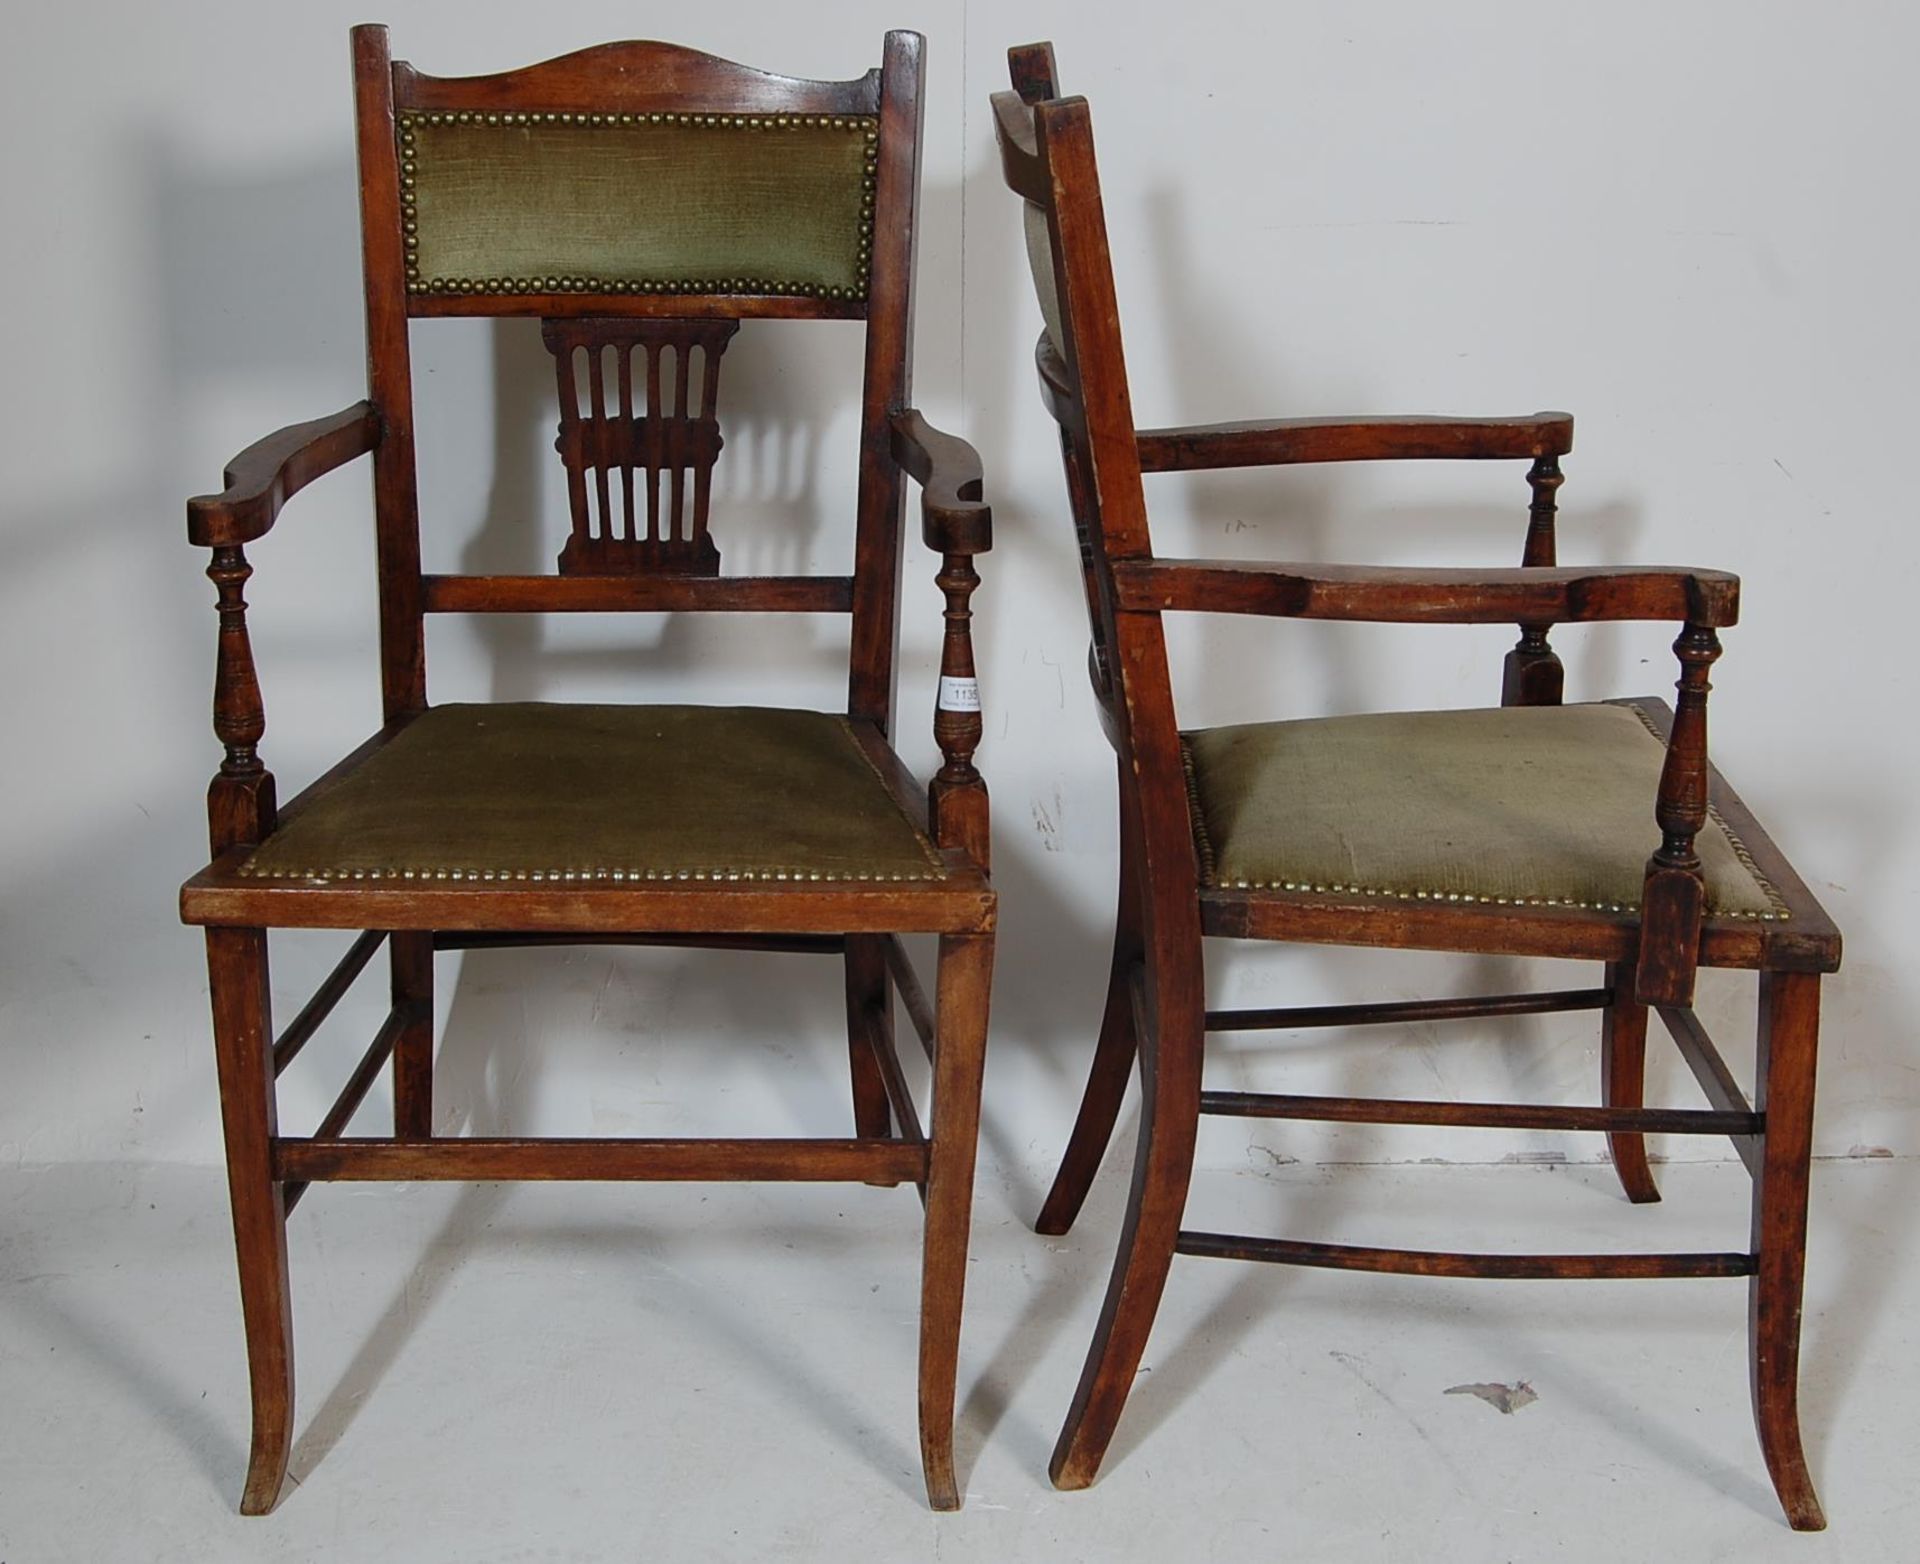 TWO 19TH CENTURY LATE VICTORIAN BEDROOM CHAIRS - Image 4 of 5